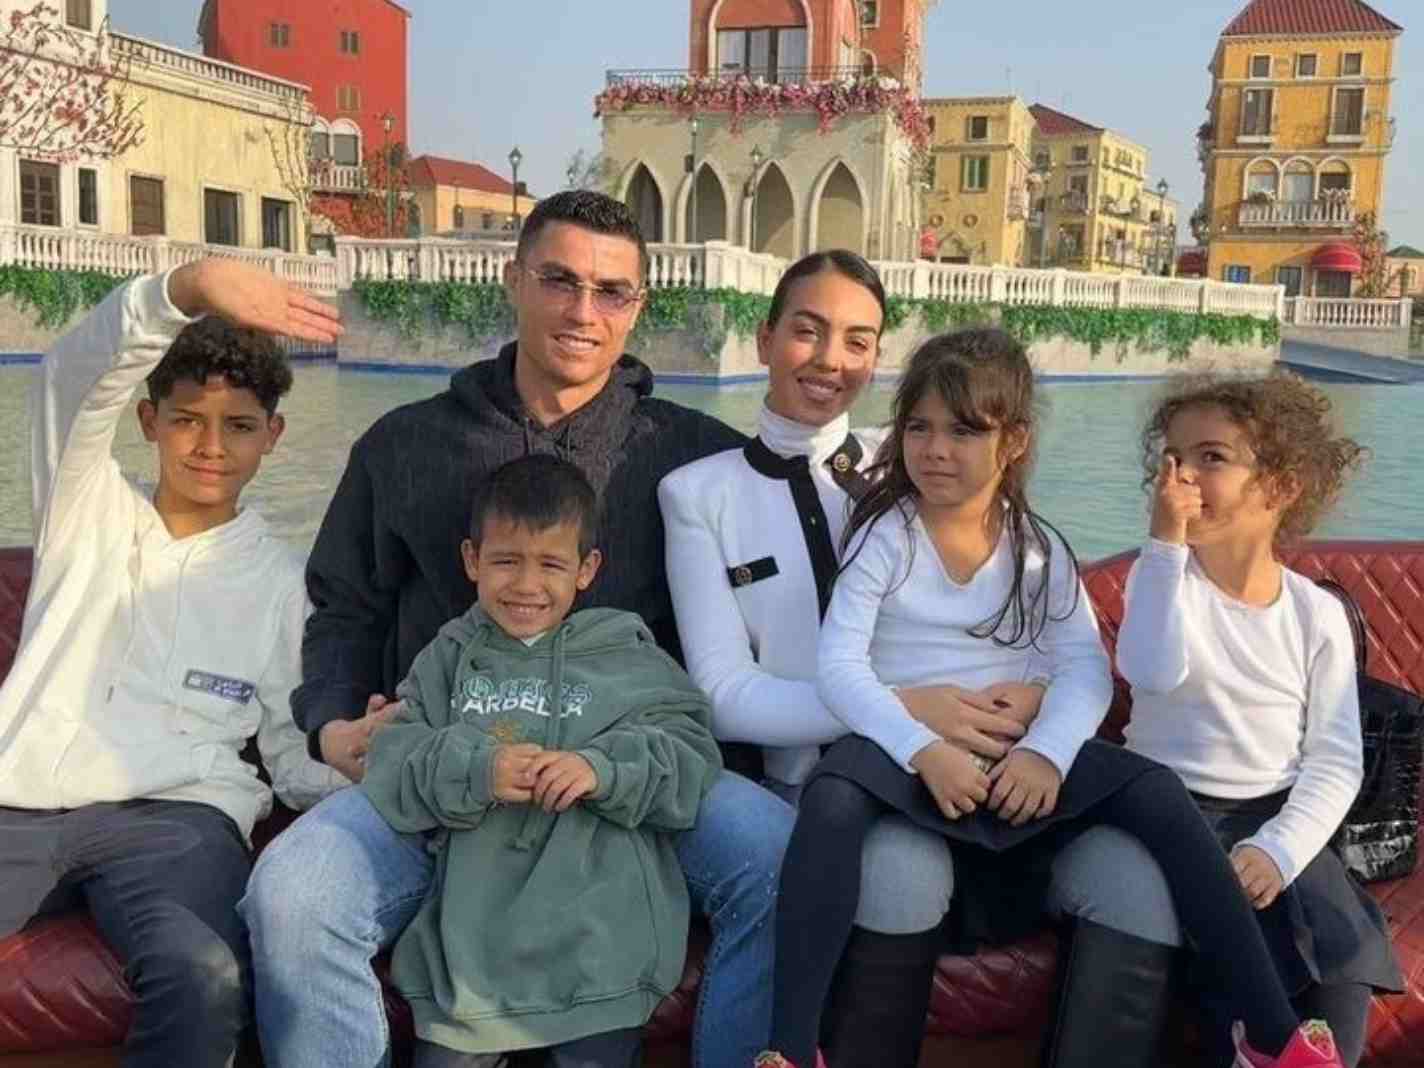 How Cristiano Ronaldo Helped His Family Handle Angel’s Passing